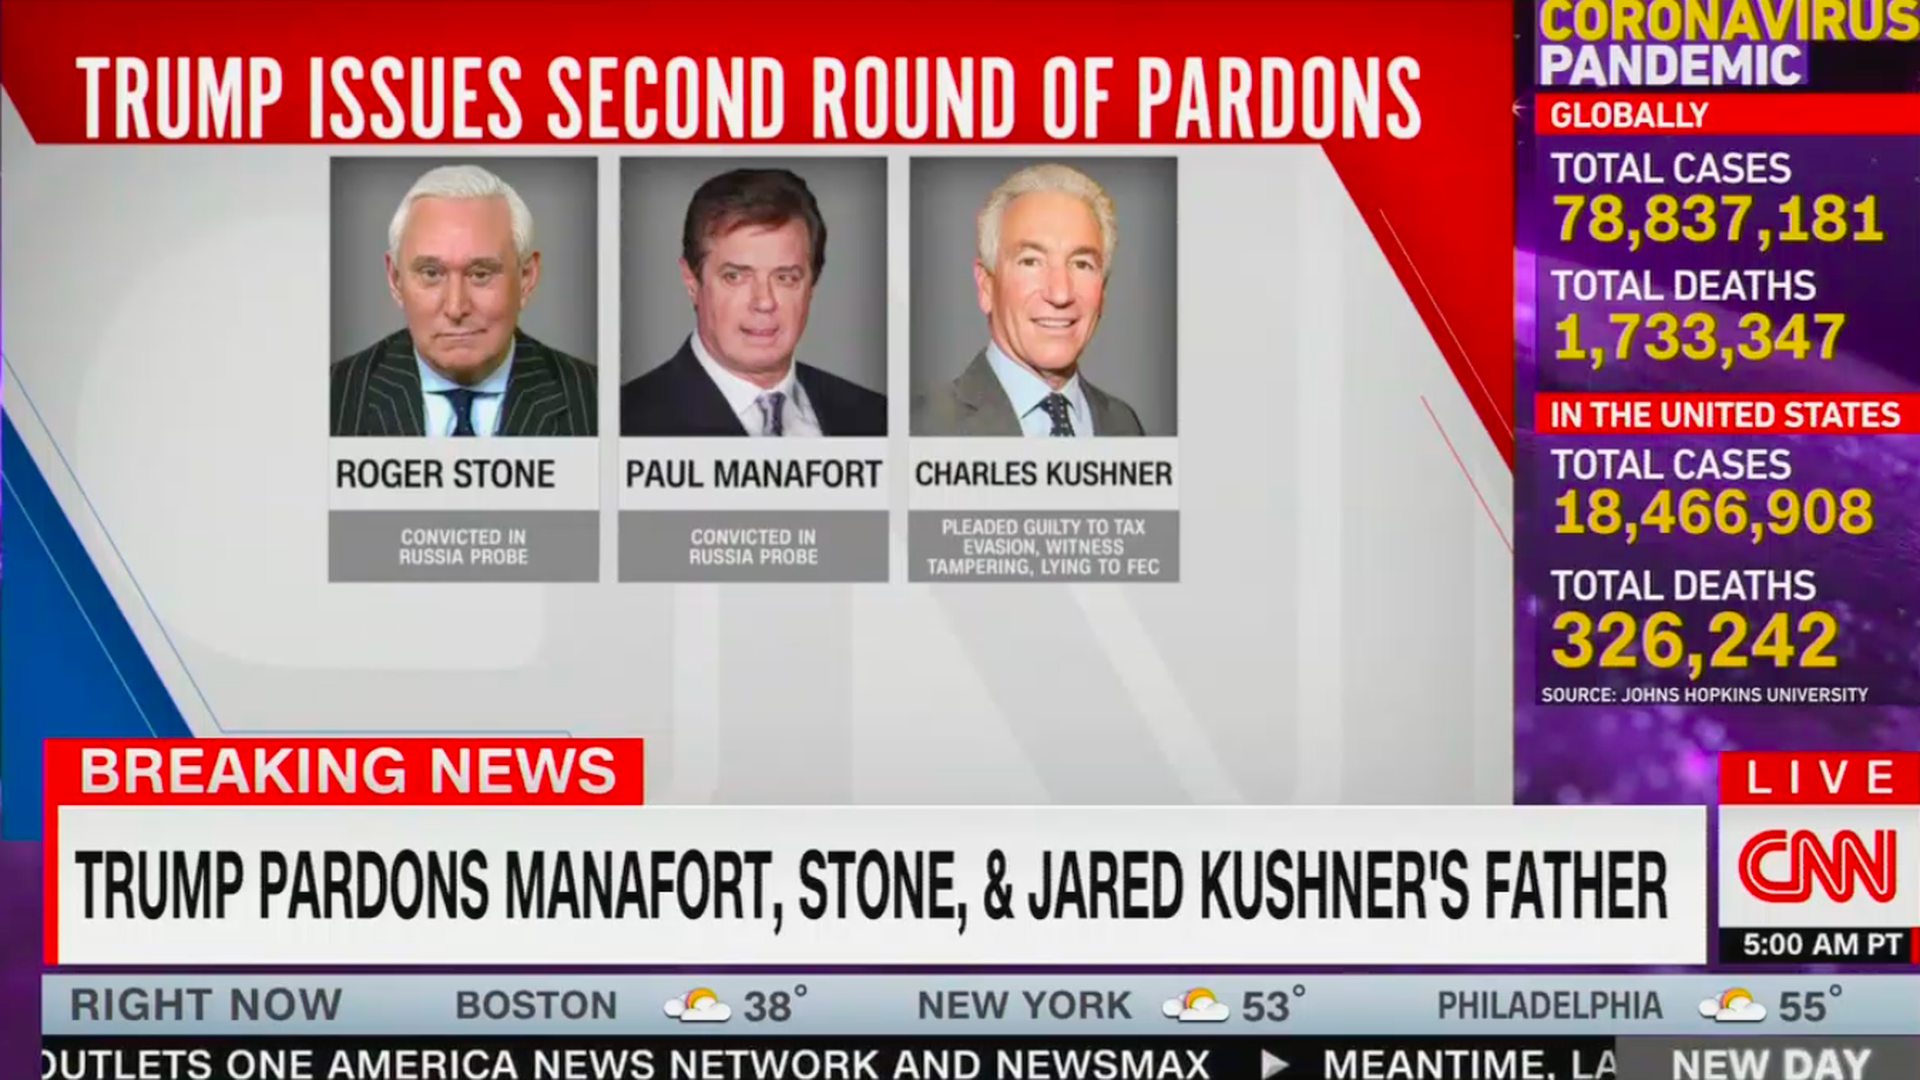 Screenshot of CNN graphic on Trump pardons, featuring photos of Roger Stone, Paul Manafort and Charles Kushner.